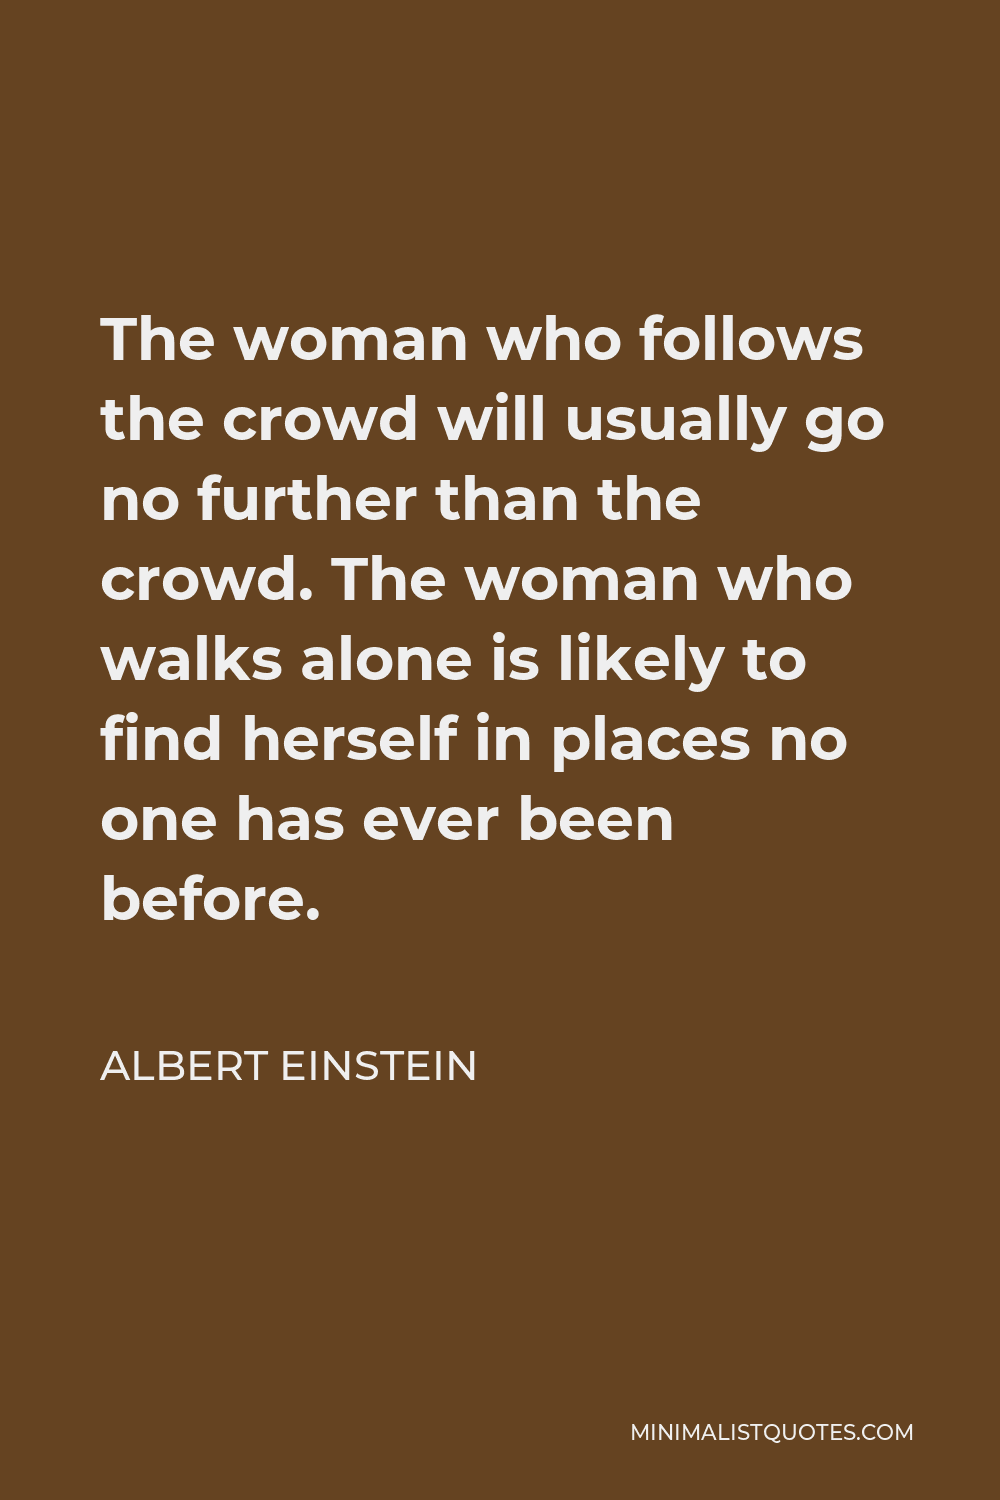 Albert Einstein Quote - The woman who follows the crowd will usually go no further than the crowd. The woman who walks alone is likely to find herself in places no one has ever been before.